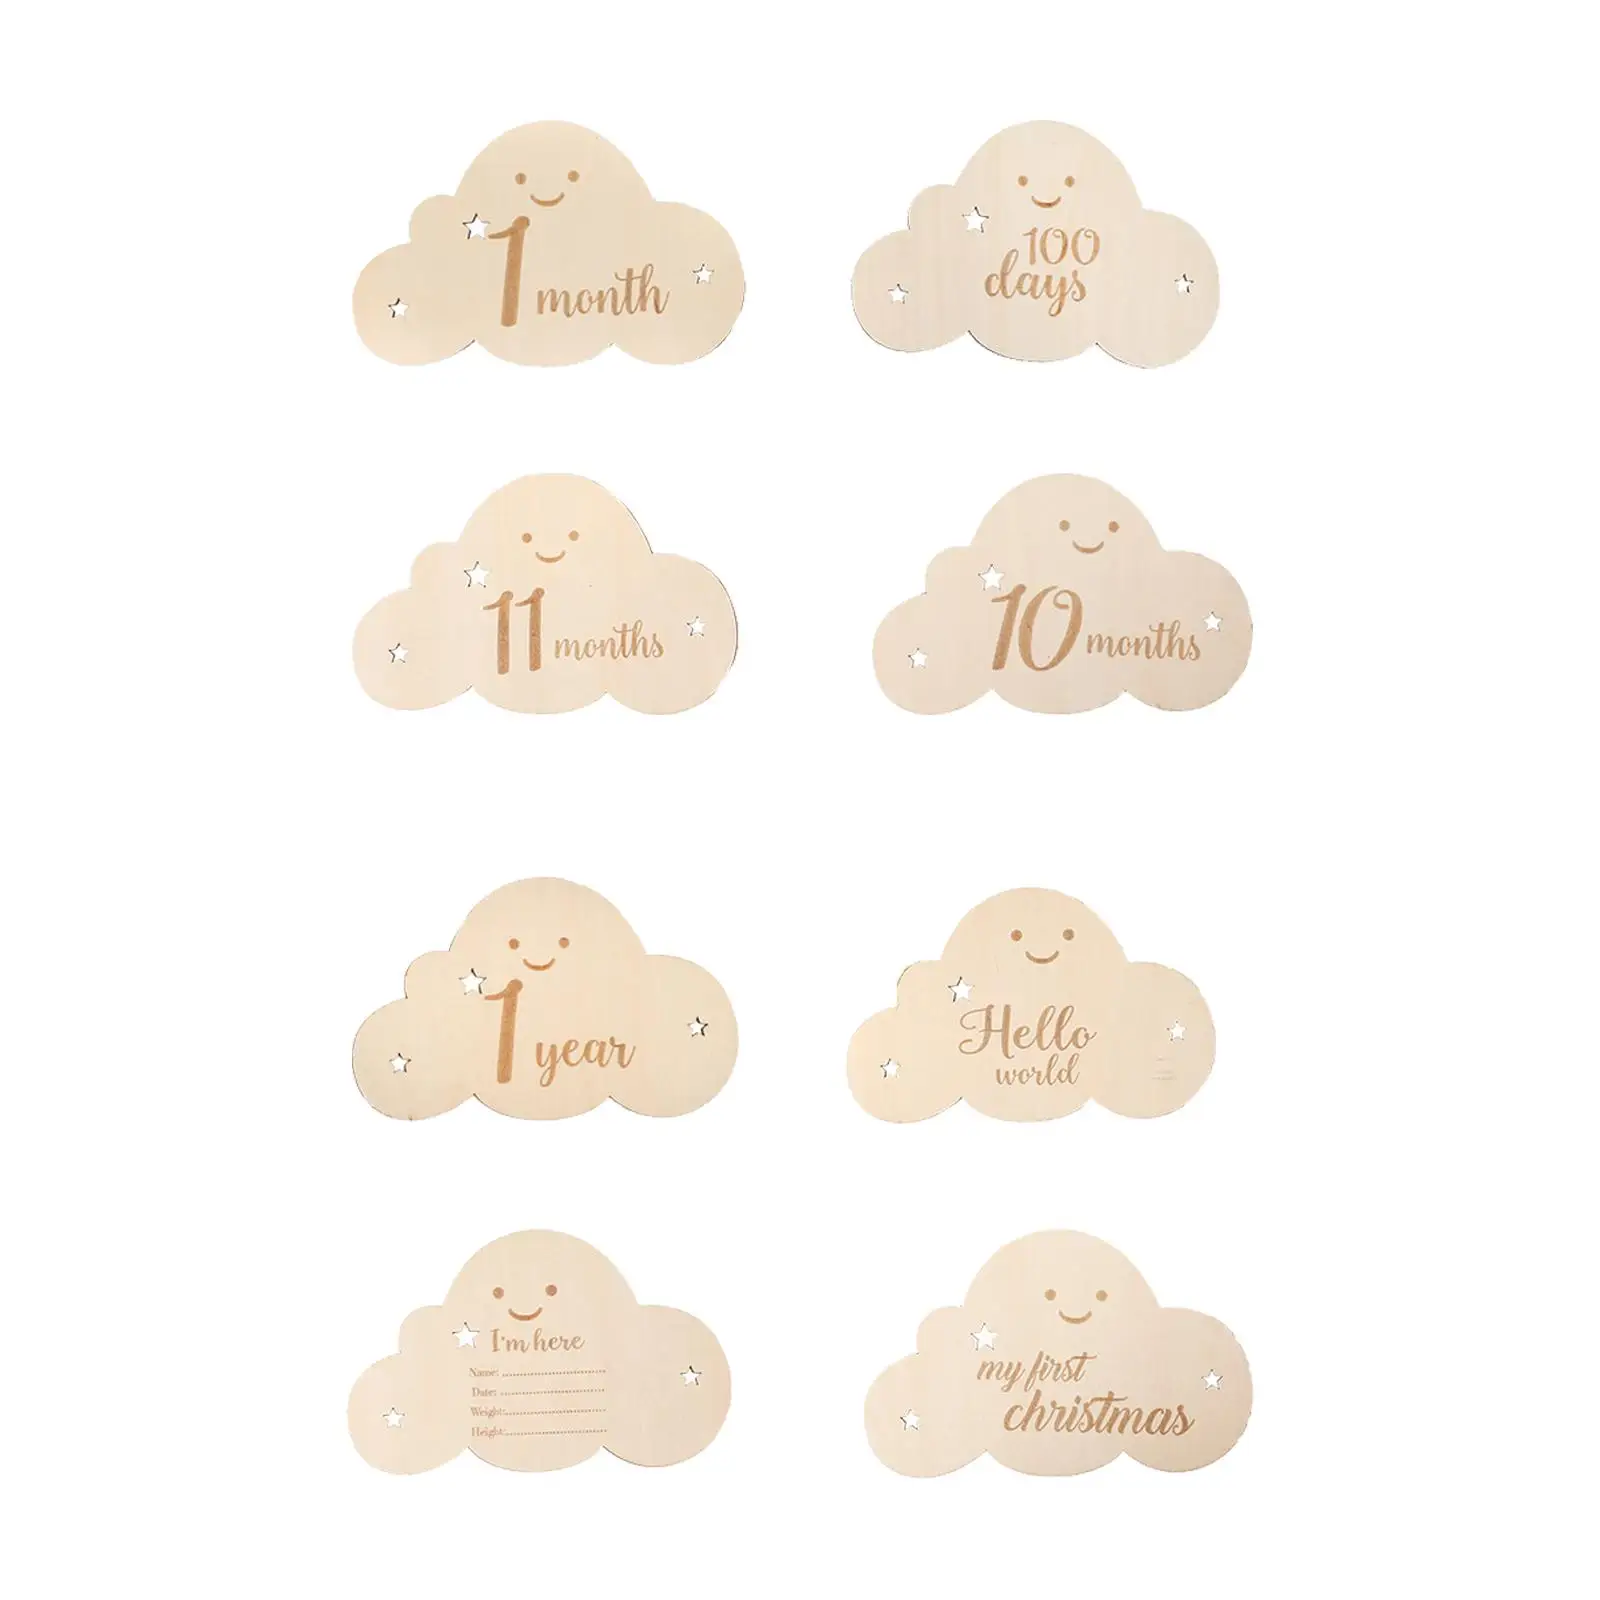 8x Wooden Baby Milestone Cards Keepsake Toy Cute Clouds Shape Smooth Surface Photography Accessories New Mom Gifts Newborn Gifts